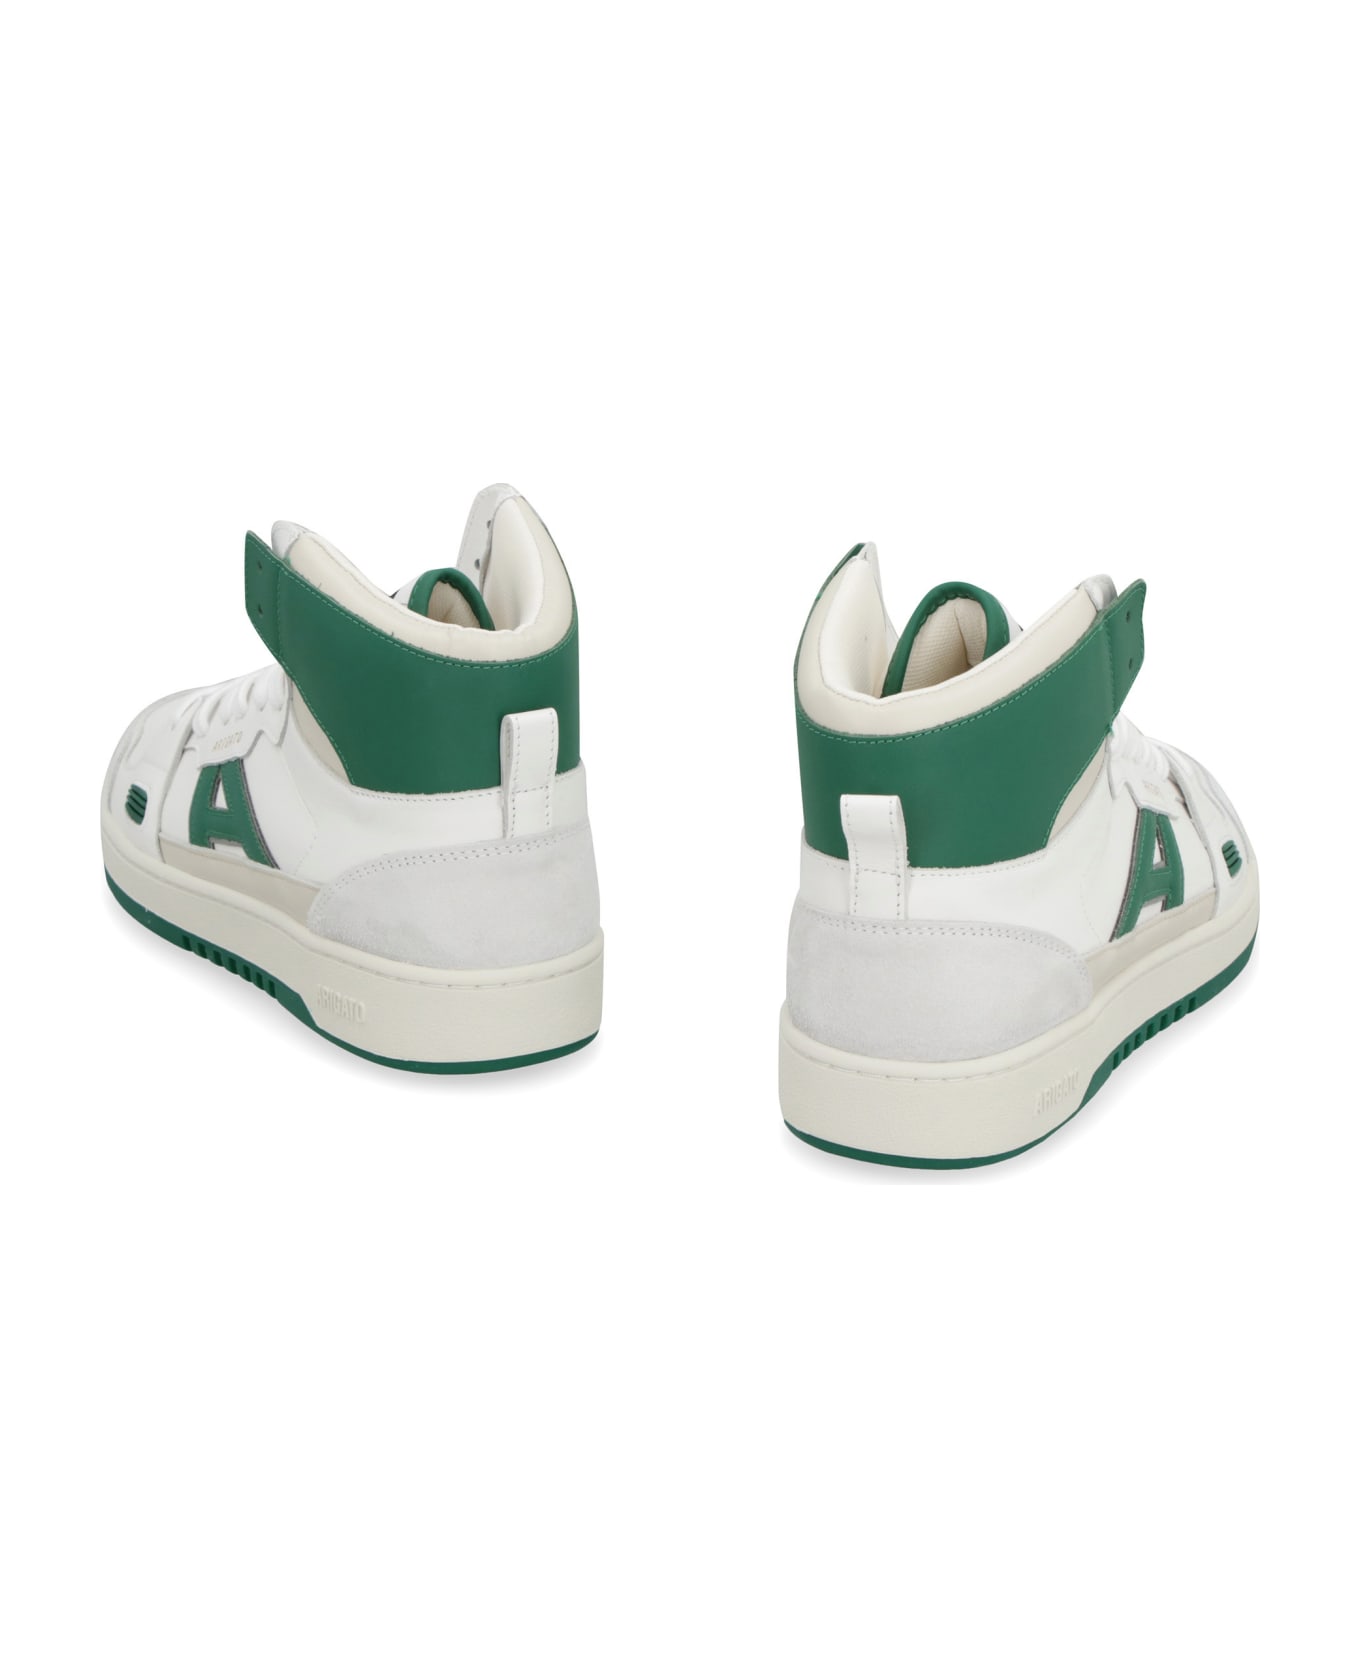 Axel Arigato A-dice Hi High-top Sneakers - White